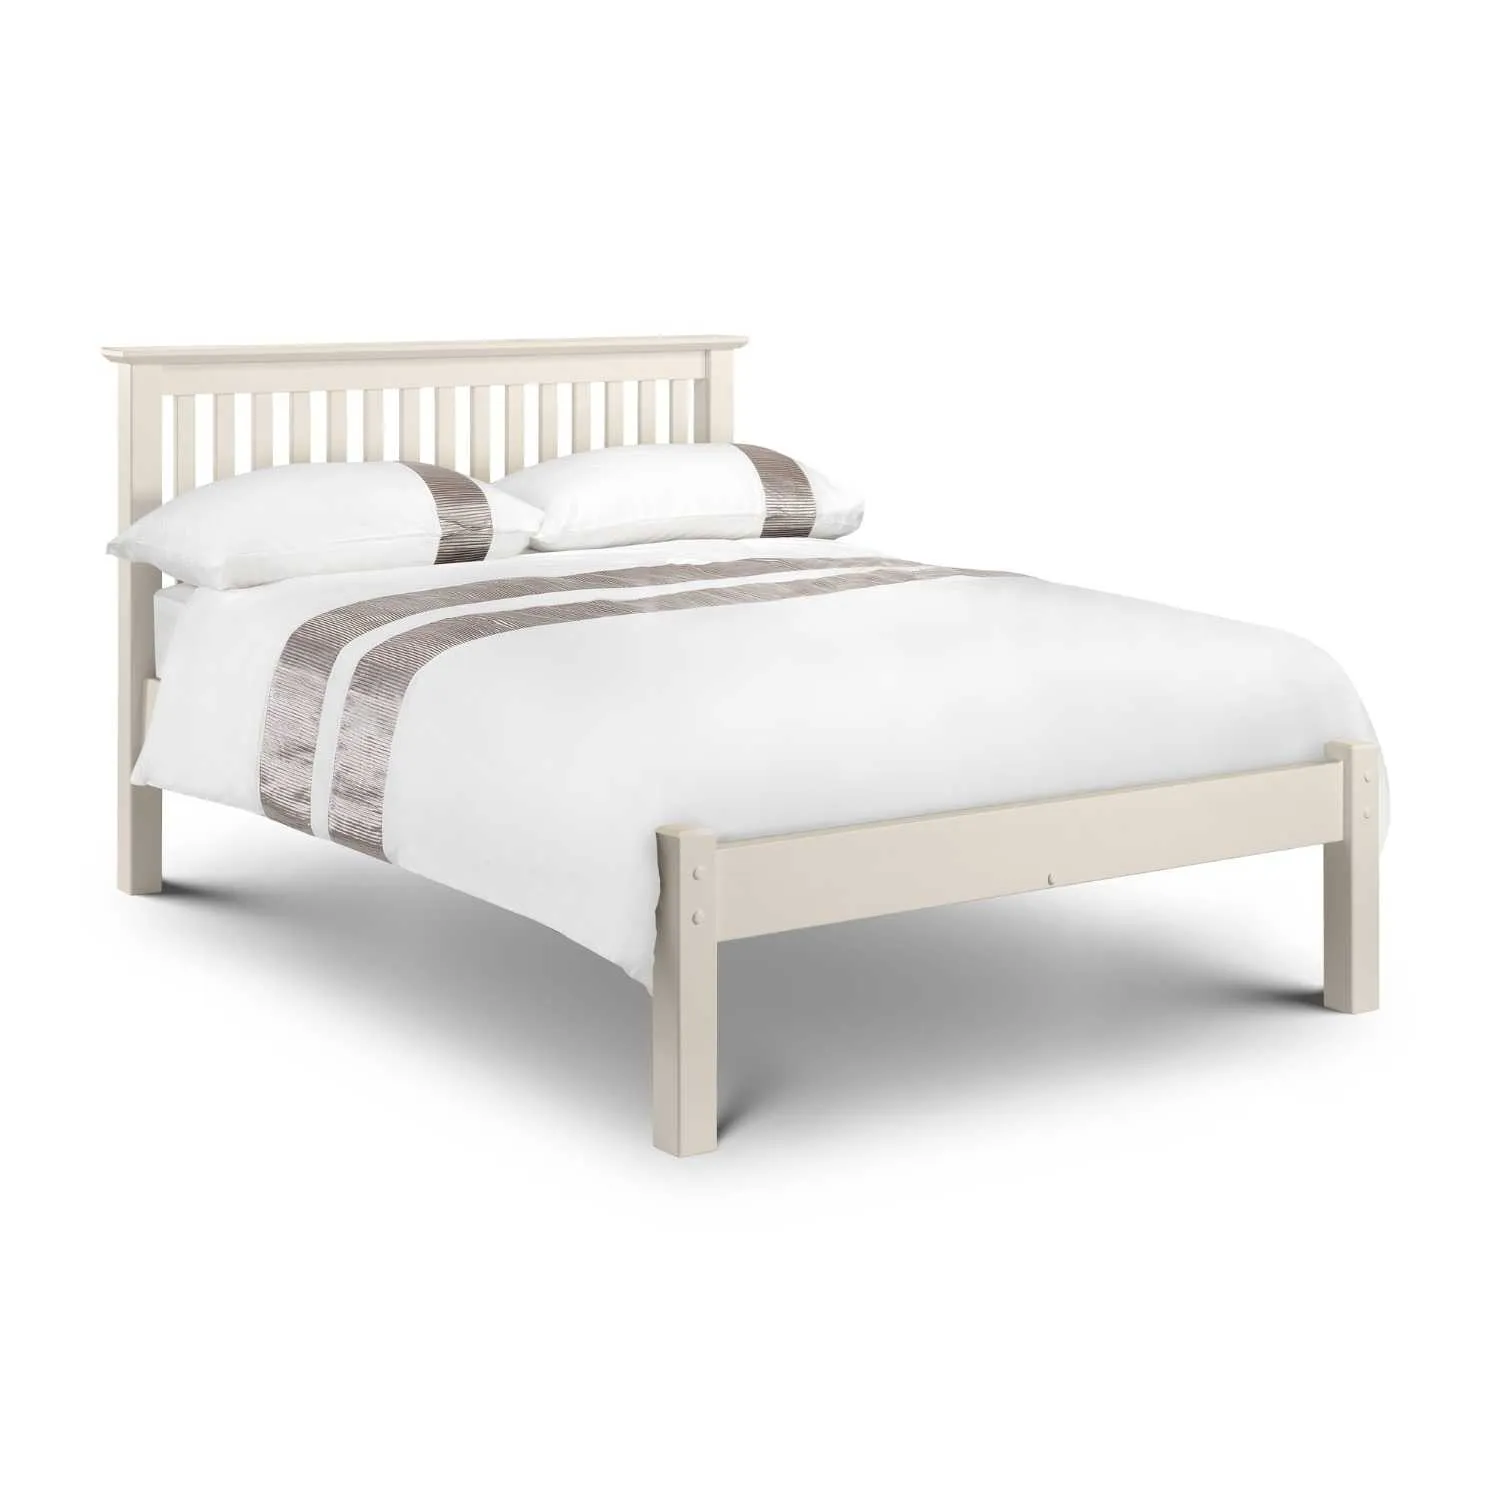 White Painted Wooden Low Foot End Bed Frame 135cm Double 4ft6in